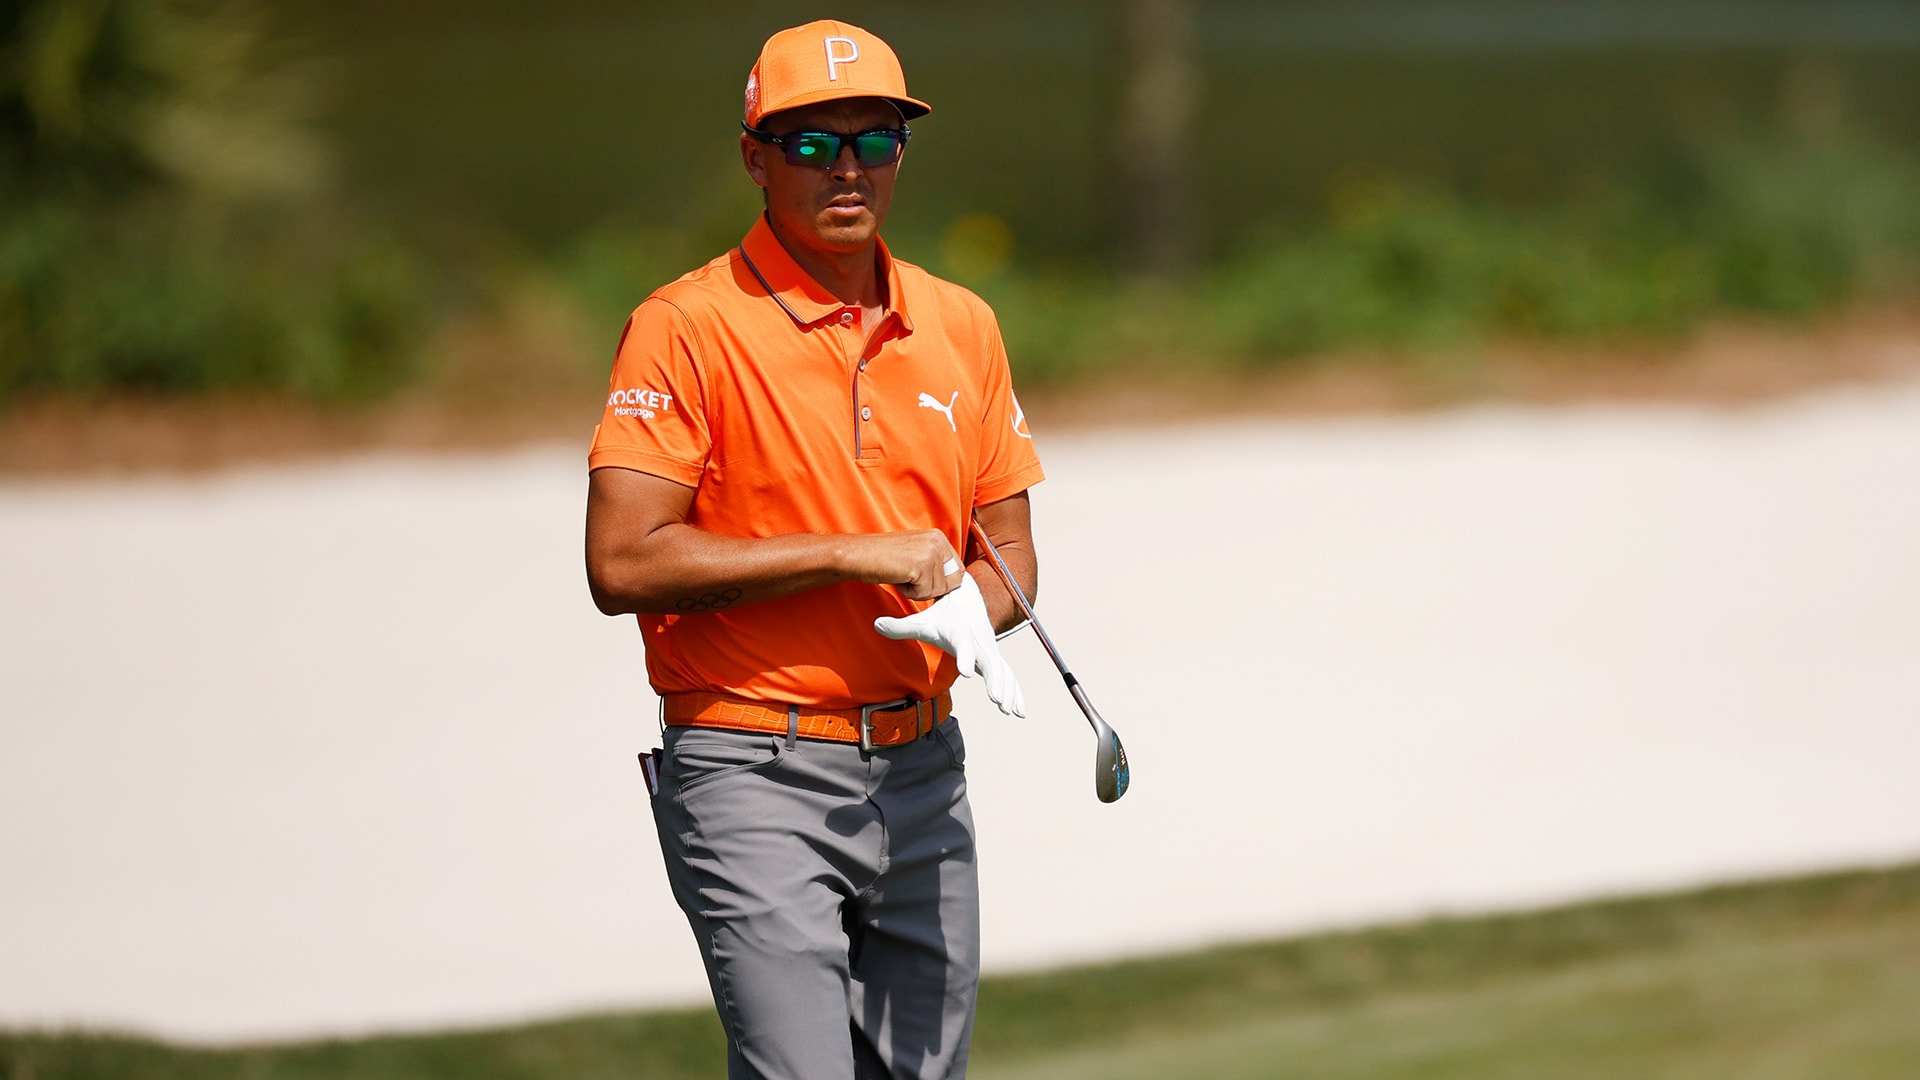 Rickie Fowler latest PGA Tour star to join Tiger Woods and Rory McIlroy’s TGL